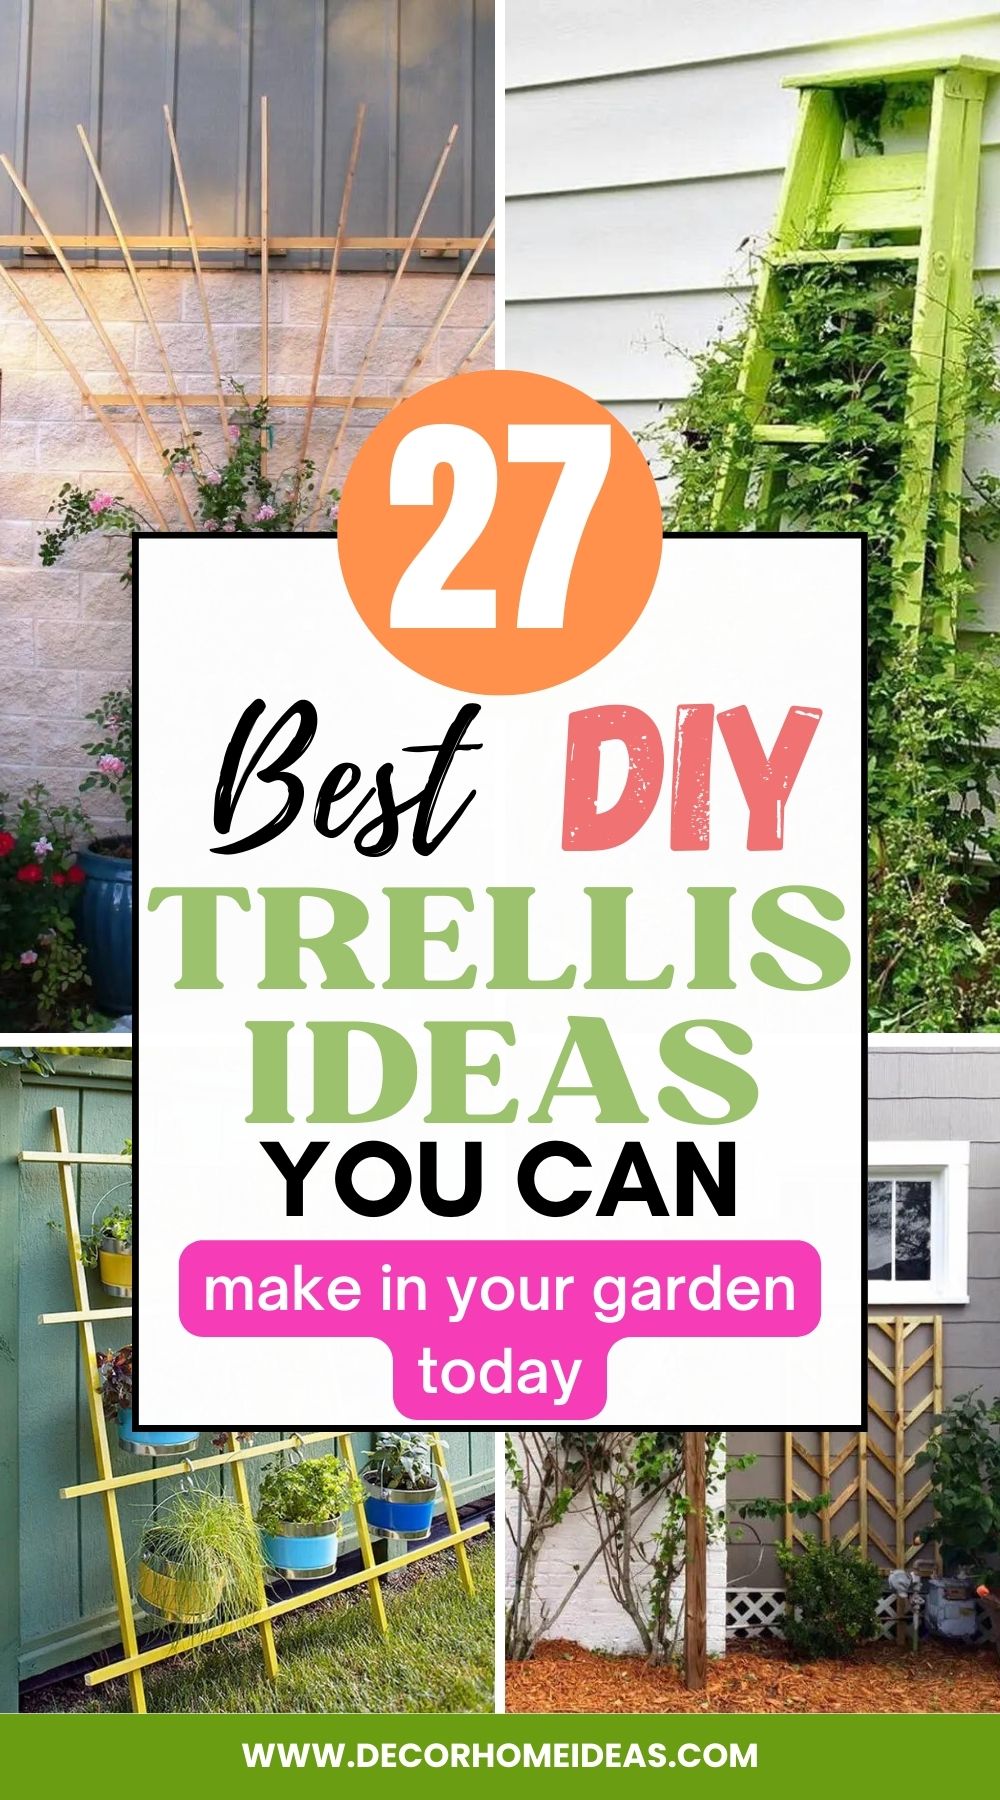 Transform your garden into a stunning display with these 26 DIY trellis ideas. From classic arches to modern designs, you'll find the perfect trellis for your garden.